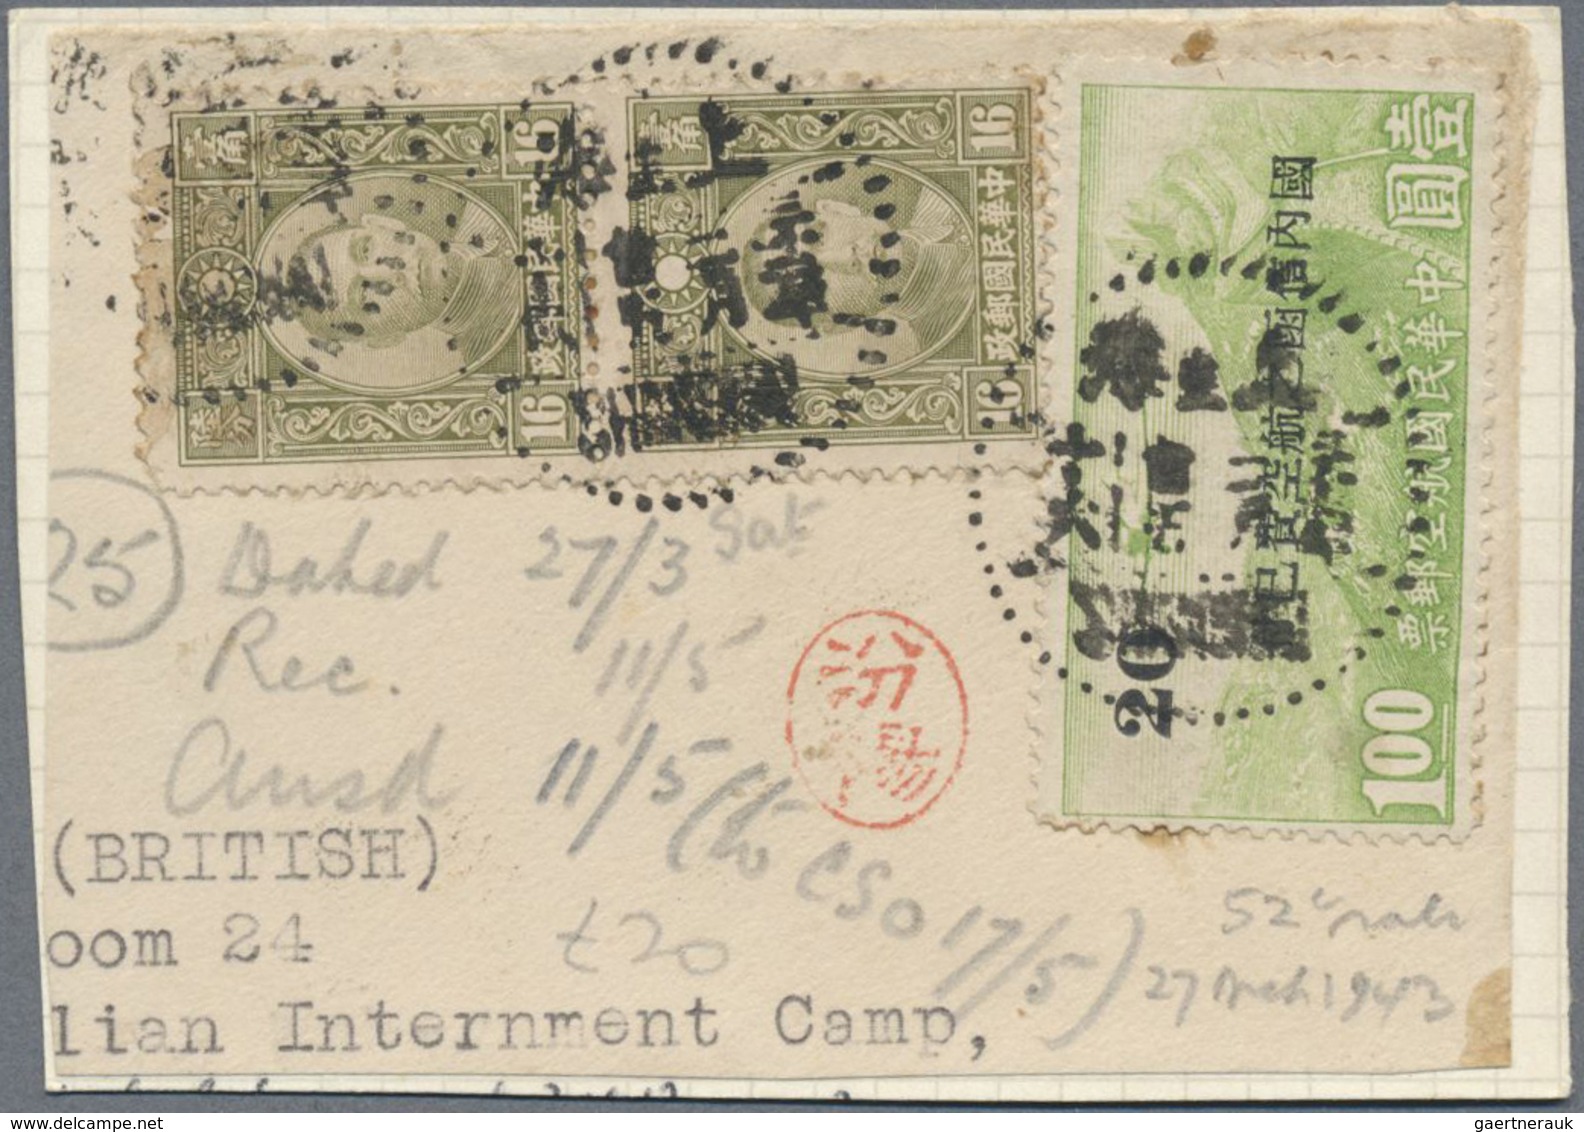 Br/Brfst China: 1902/42, covers (11), ppc (6, two real used, otherwise cto viewside) and two pieces. Inc. 194